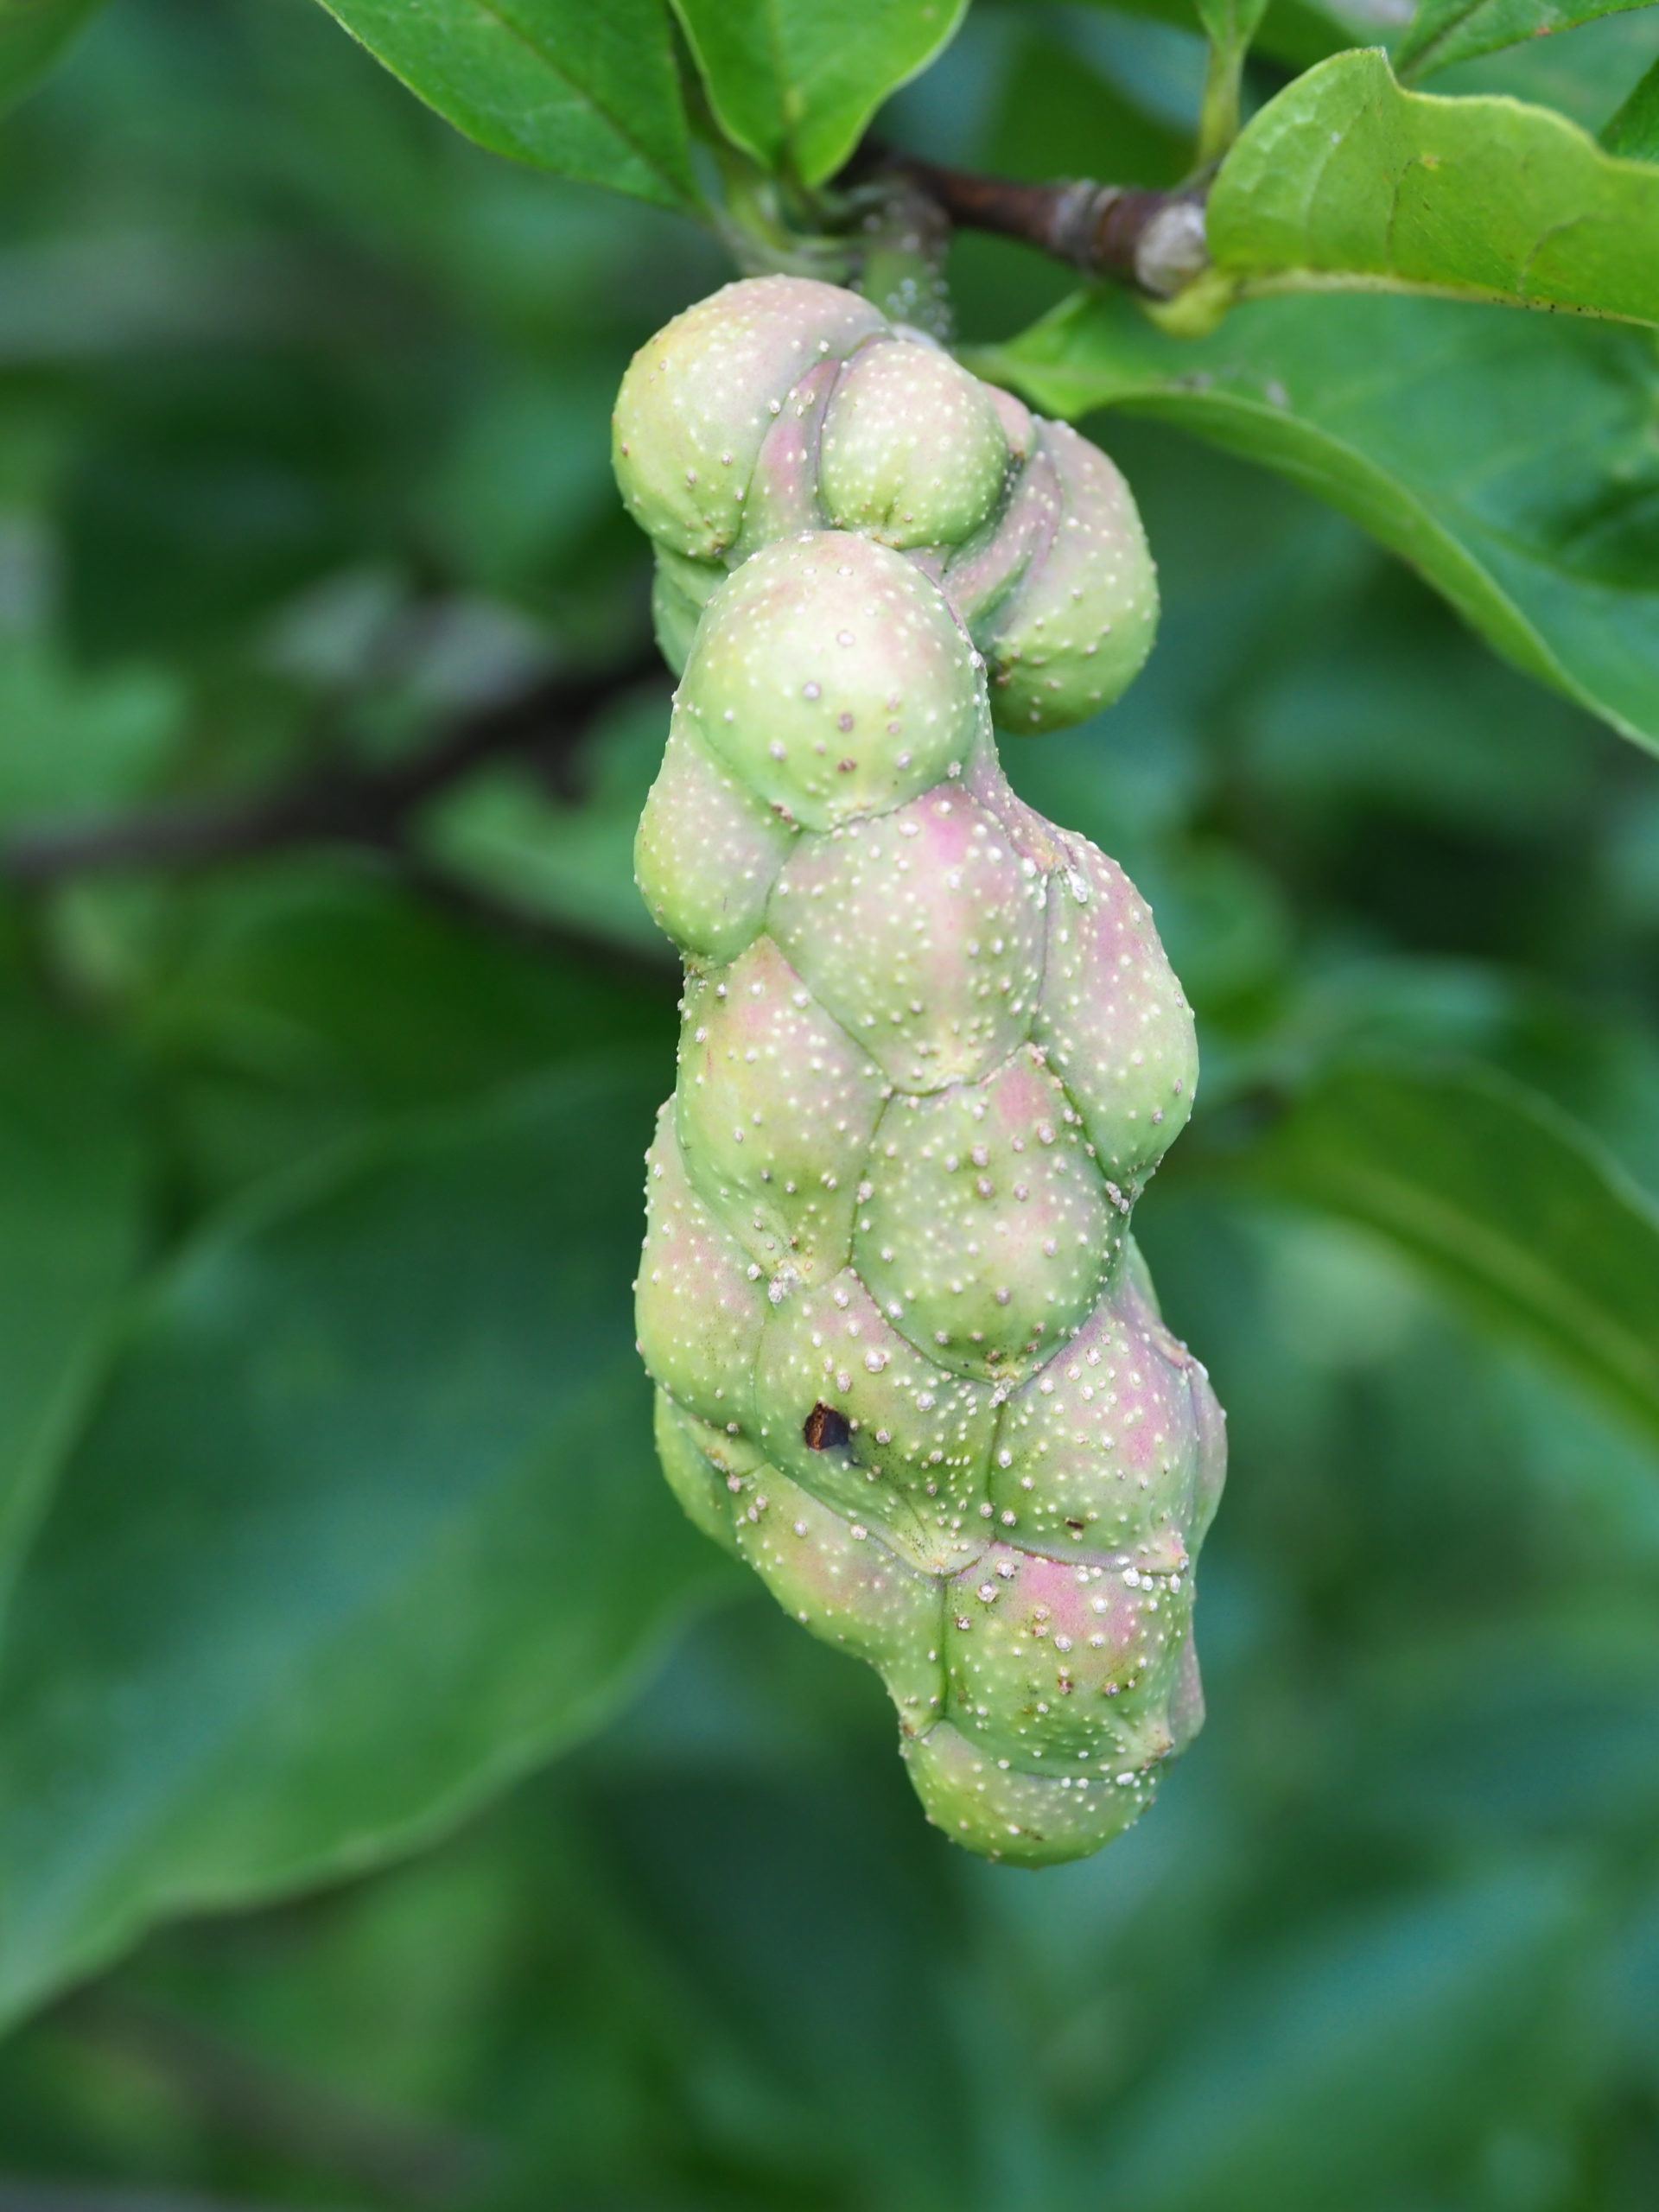 The “fruiting body” of seed inside the encapsulated membrane on Magnolia “Spiced Spumoni.” While looking a bit strange and unusual, it does add interest to the tree. 